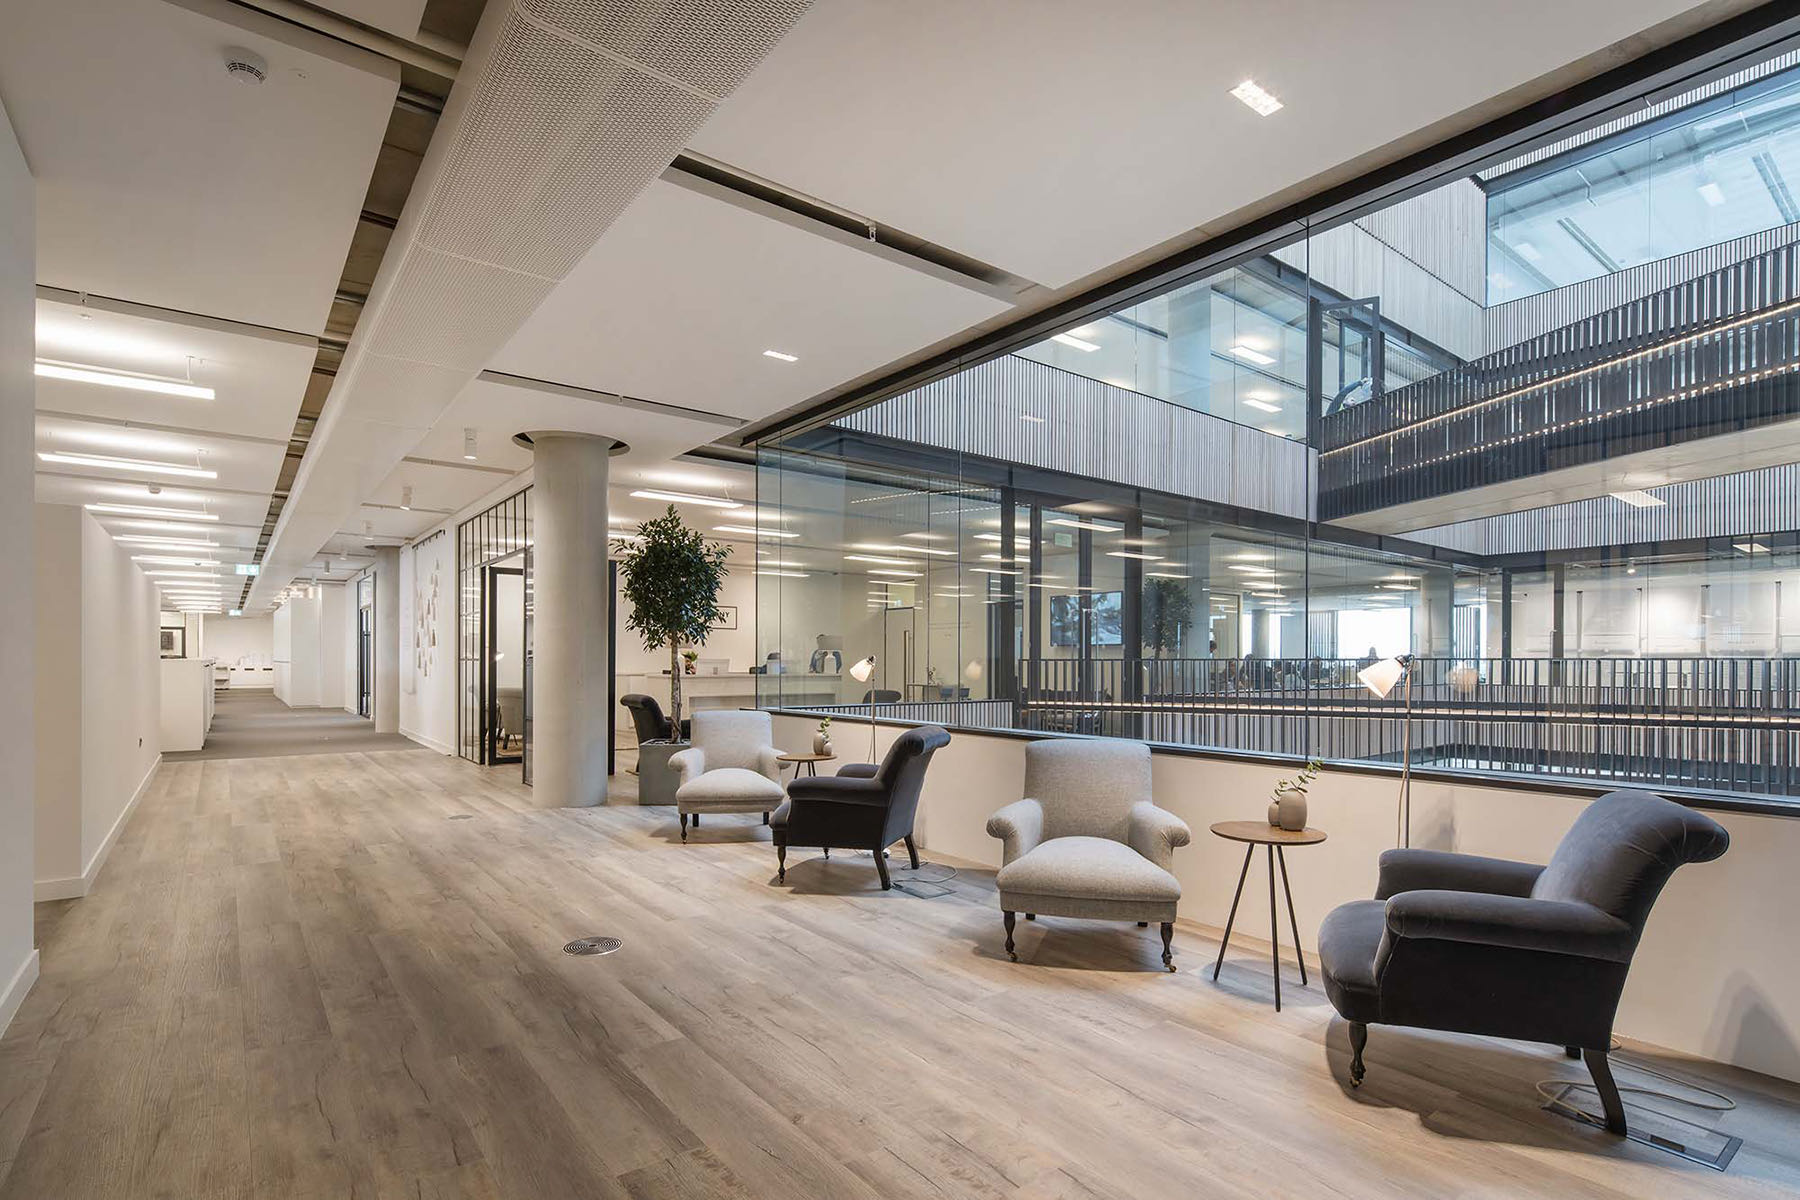 A Look Inside The White Company’s Elegant London Office